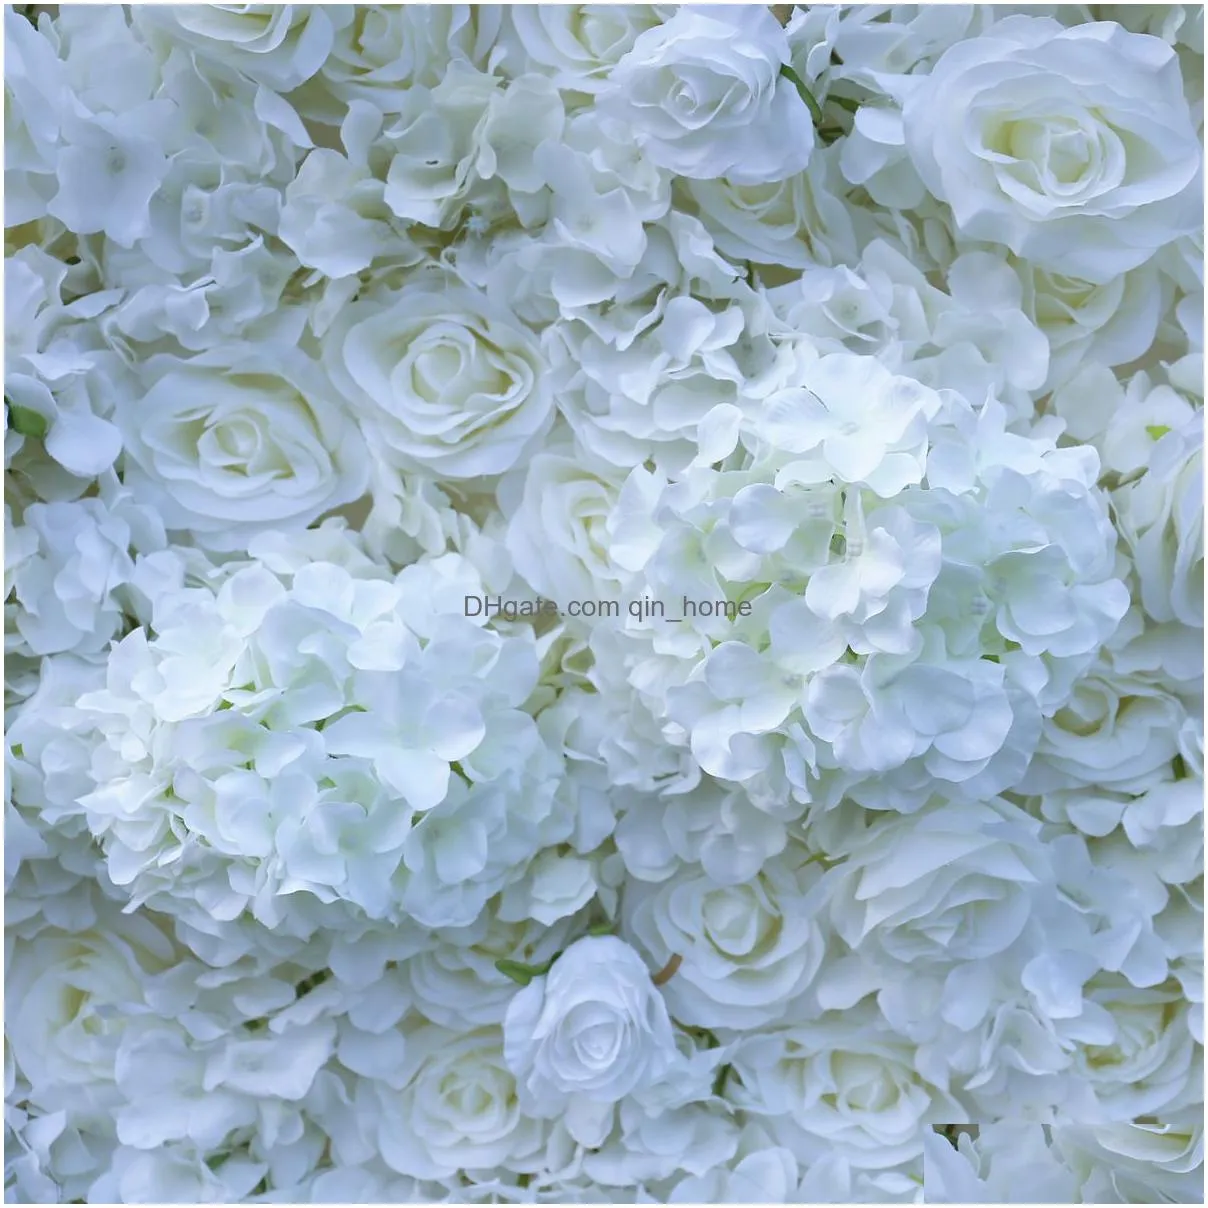 8x8ft white 3d rose flower wall made with fabric rolled up artificial flowers arrangement for wedding backdrop decoration